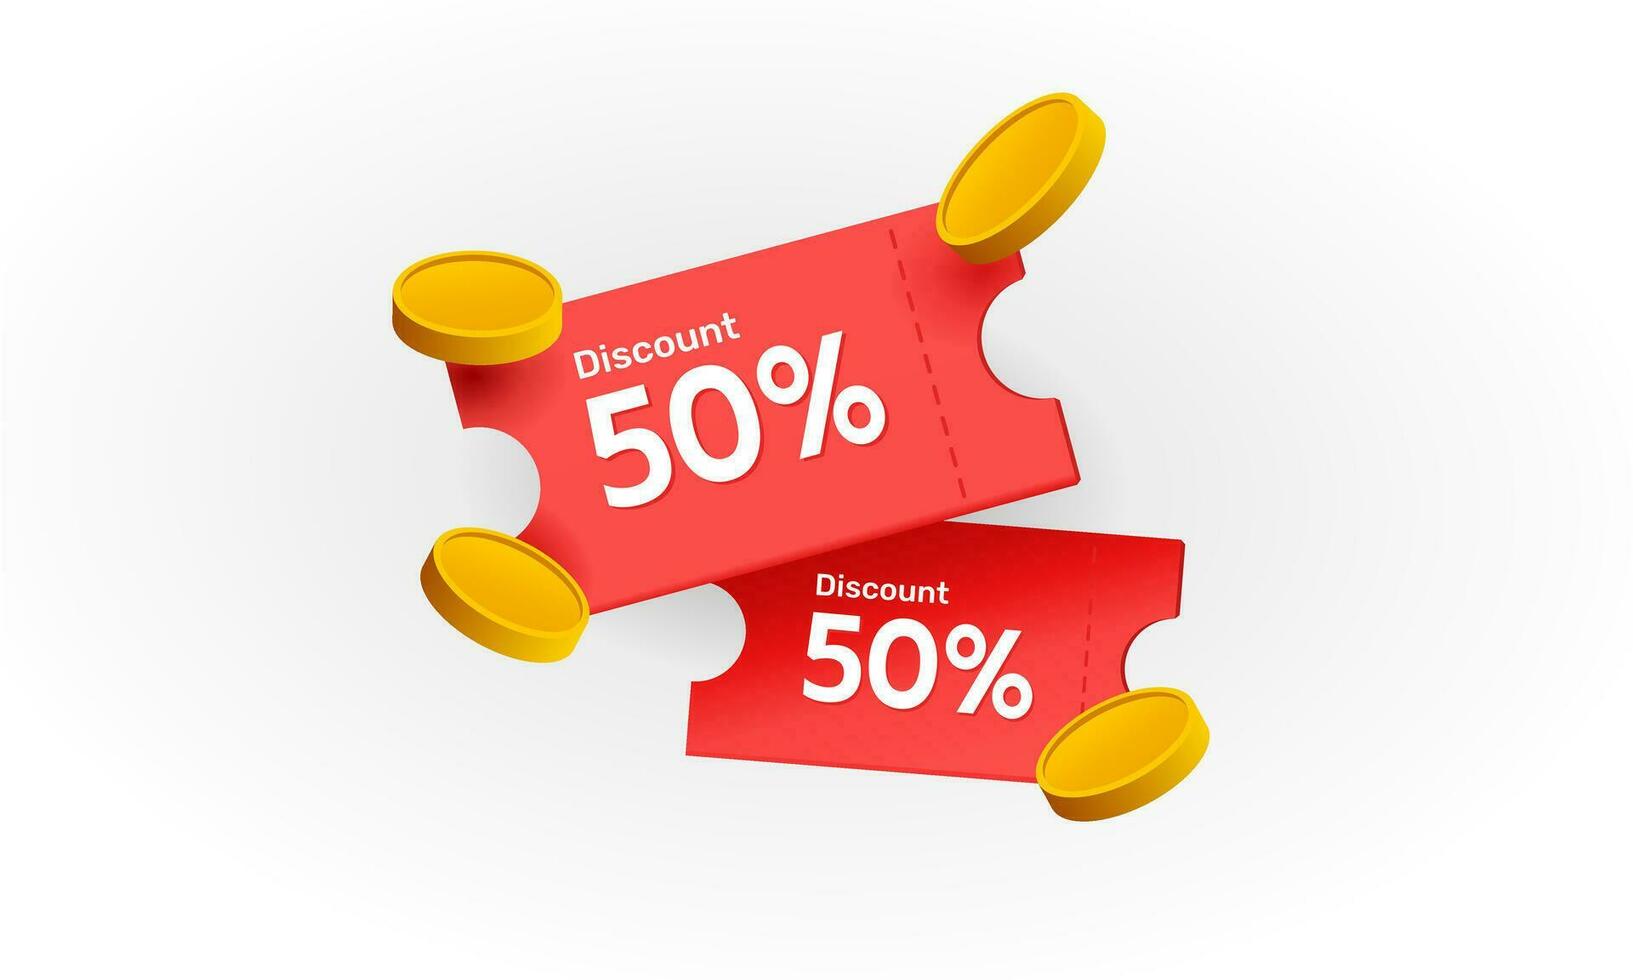 Discount ticket promotion. Special prices, discounts, cashback, coupon codes. Gift card with gold coins. Vector illustration.